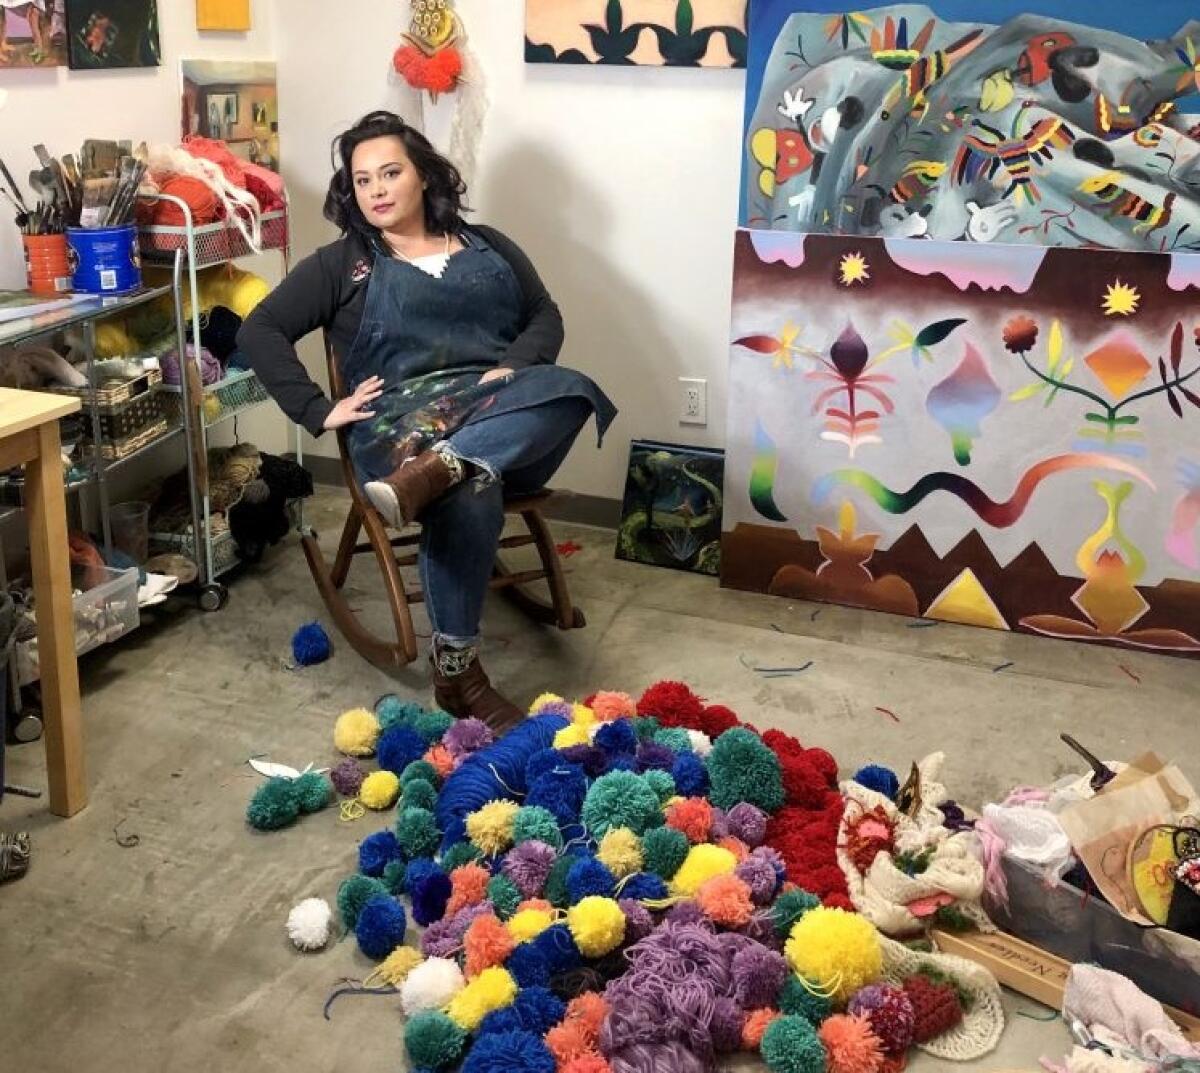 Painter and fiber artist Katie Ruiz, who lives in Normal Heights, is asking the public's help during quarantine to make pom-poms for an installation project at the Oceanside Museum of Art.